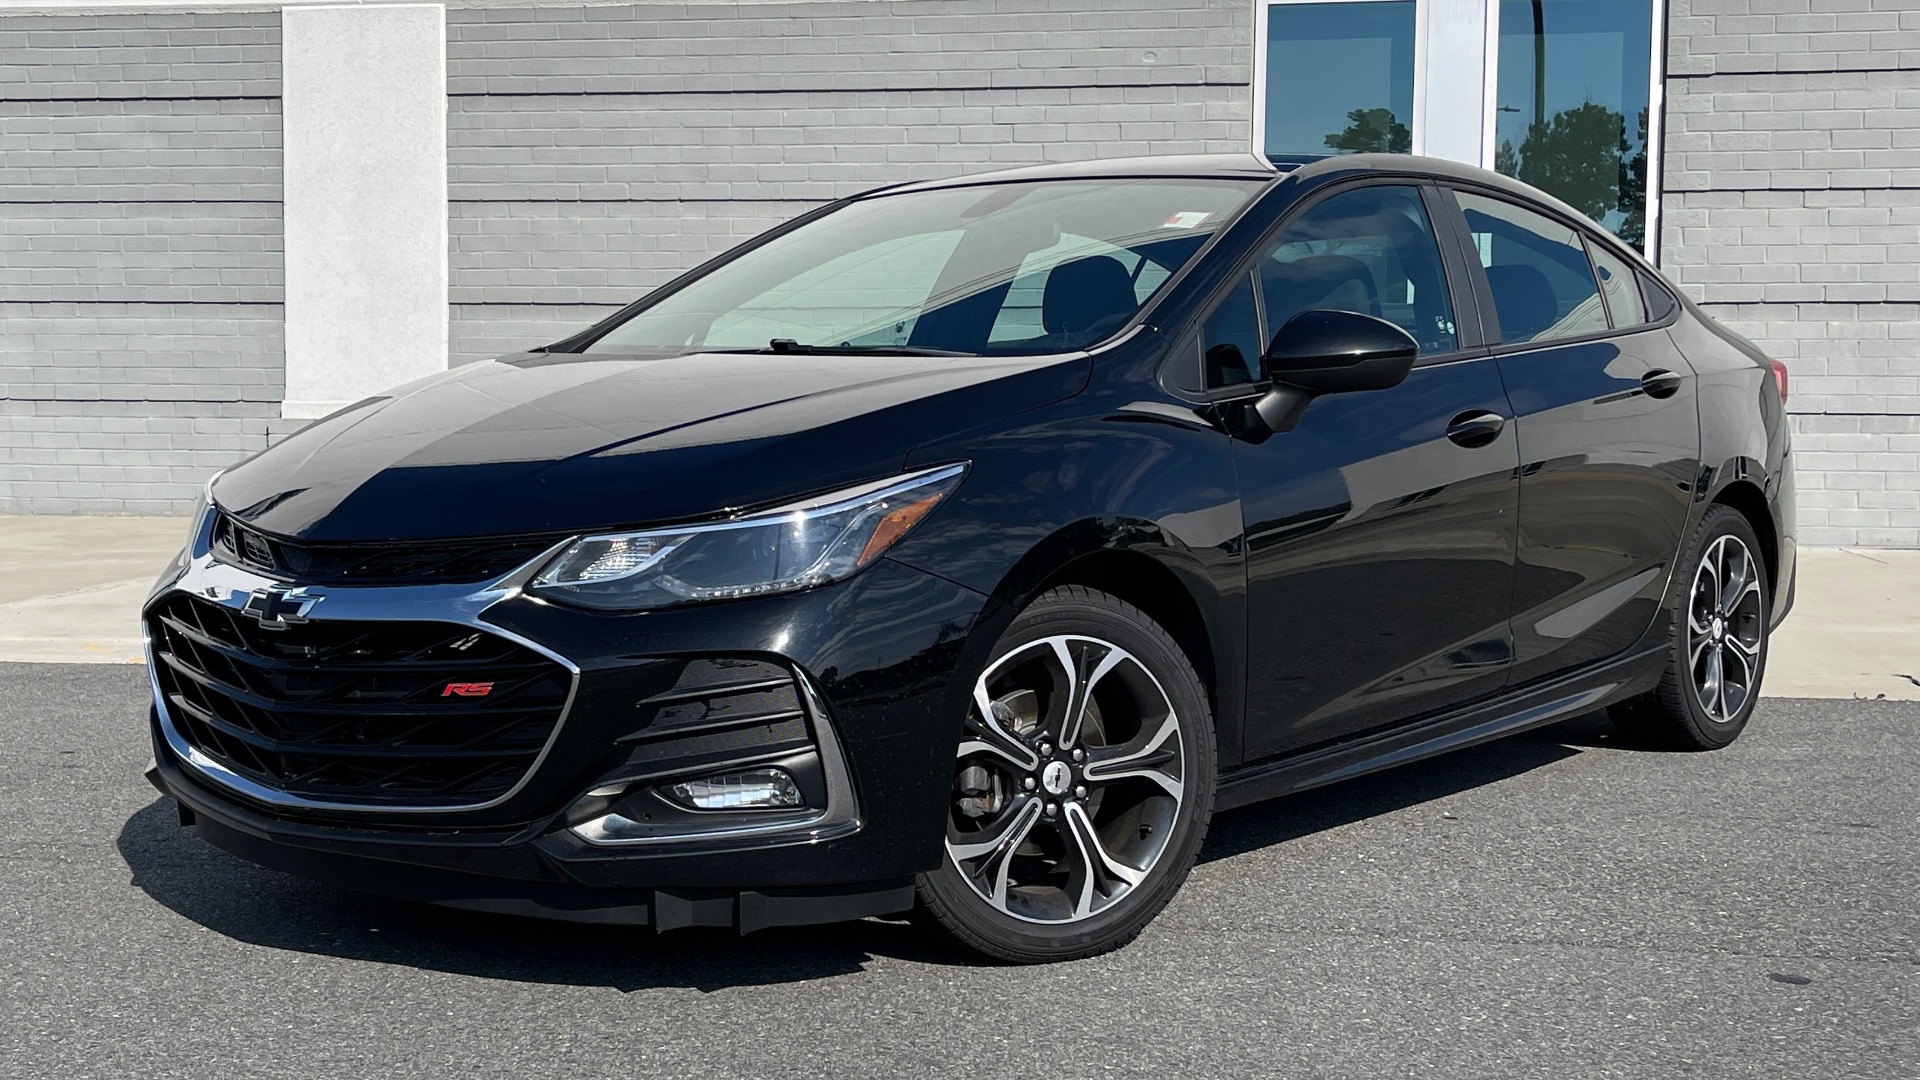 Used 2019 Chevrolet CRUZE LT / 1.4L TURBO / 6-SPD AUTO / AIR CONDITIONING / REARVIEW for sale Sold at Formula Imports in Charlotte NC 28227 1